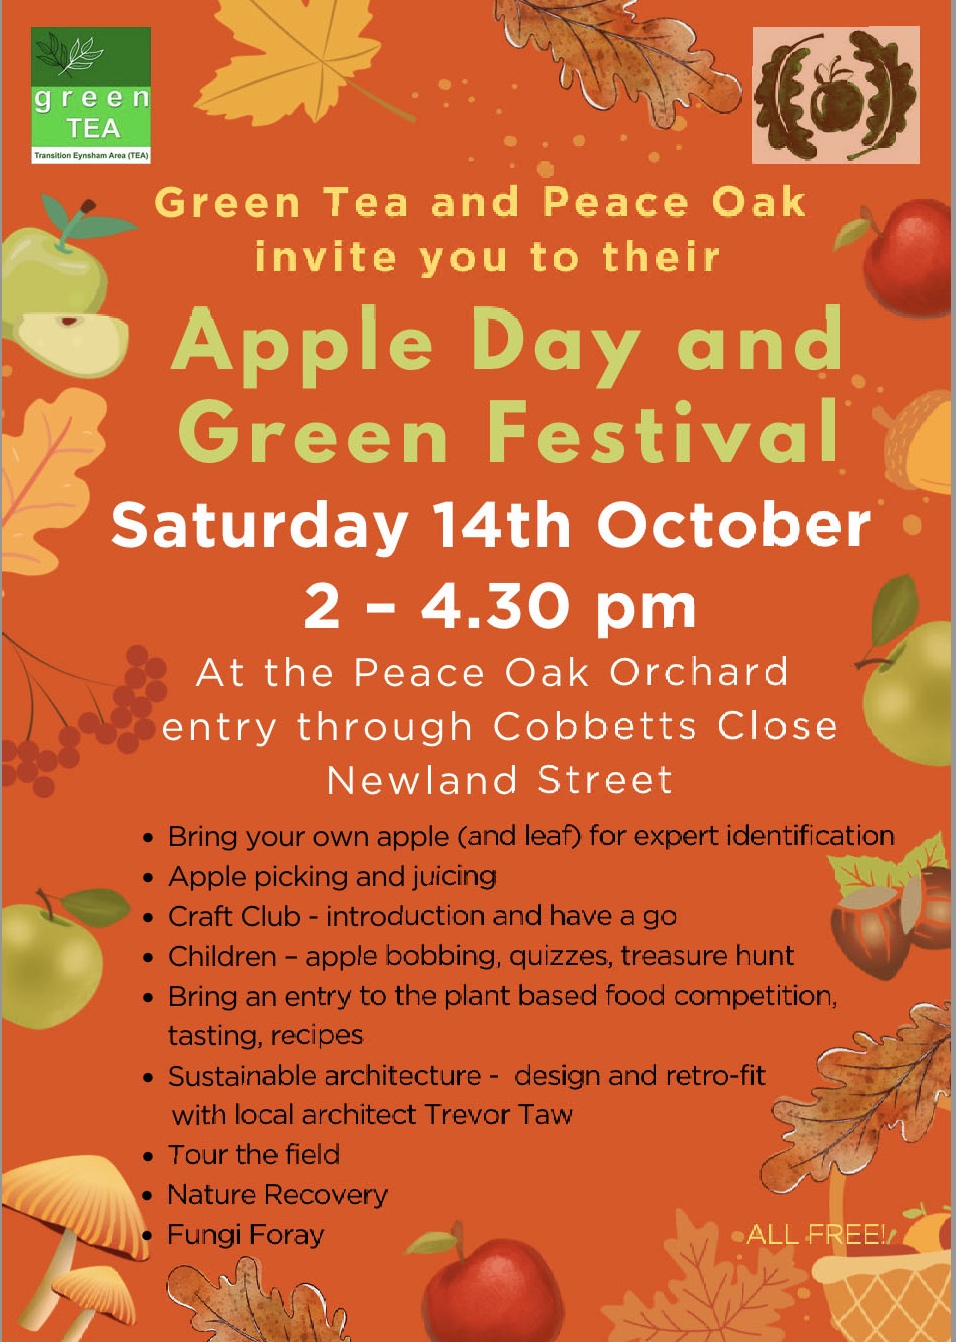 Apple Day and Green Festival